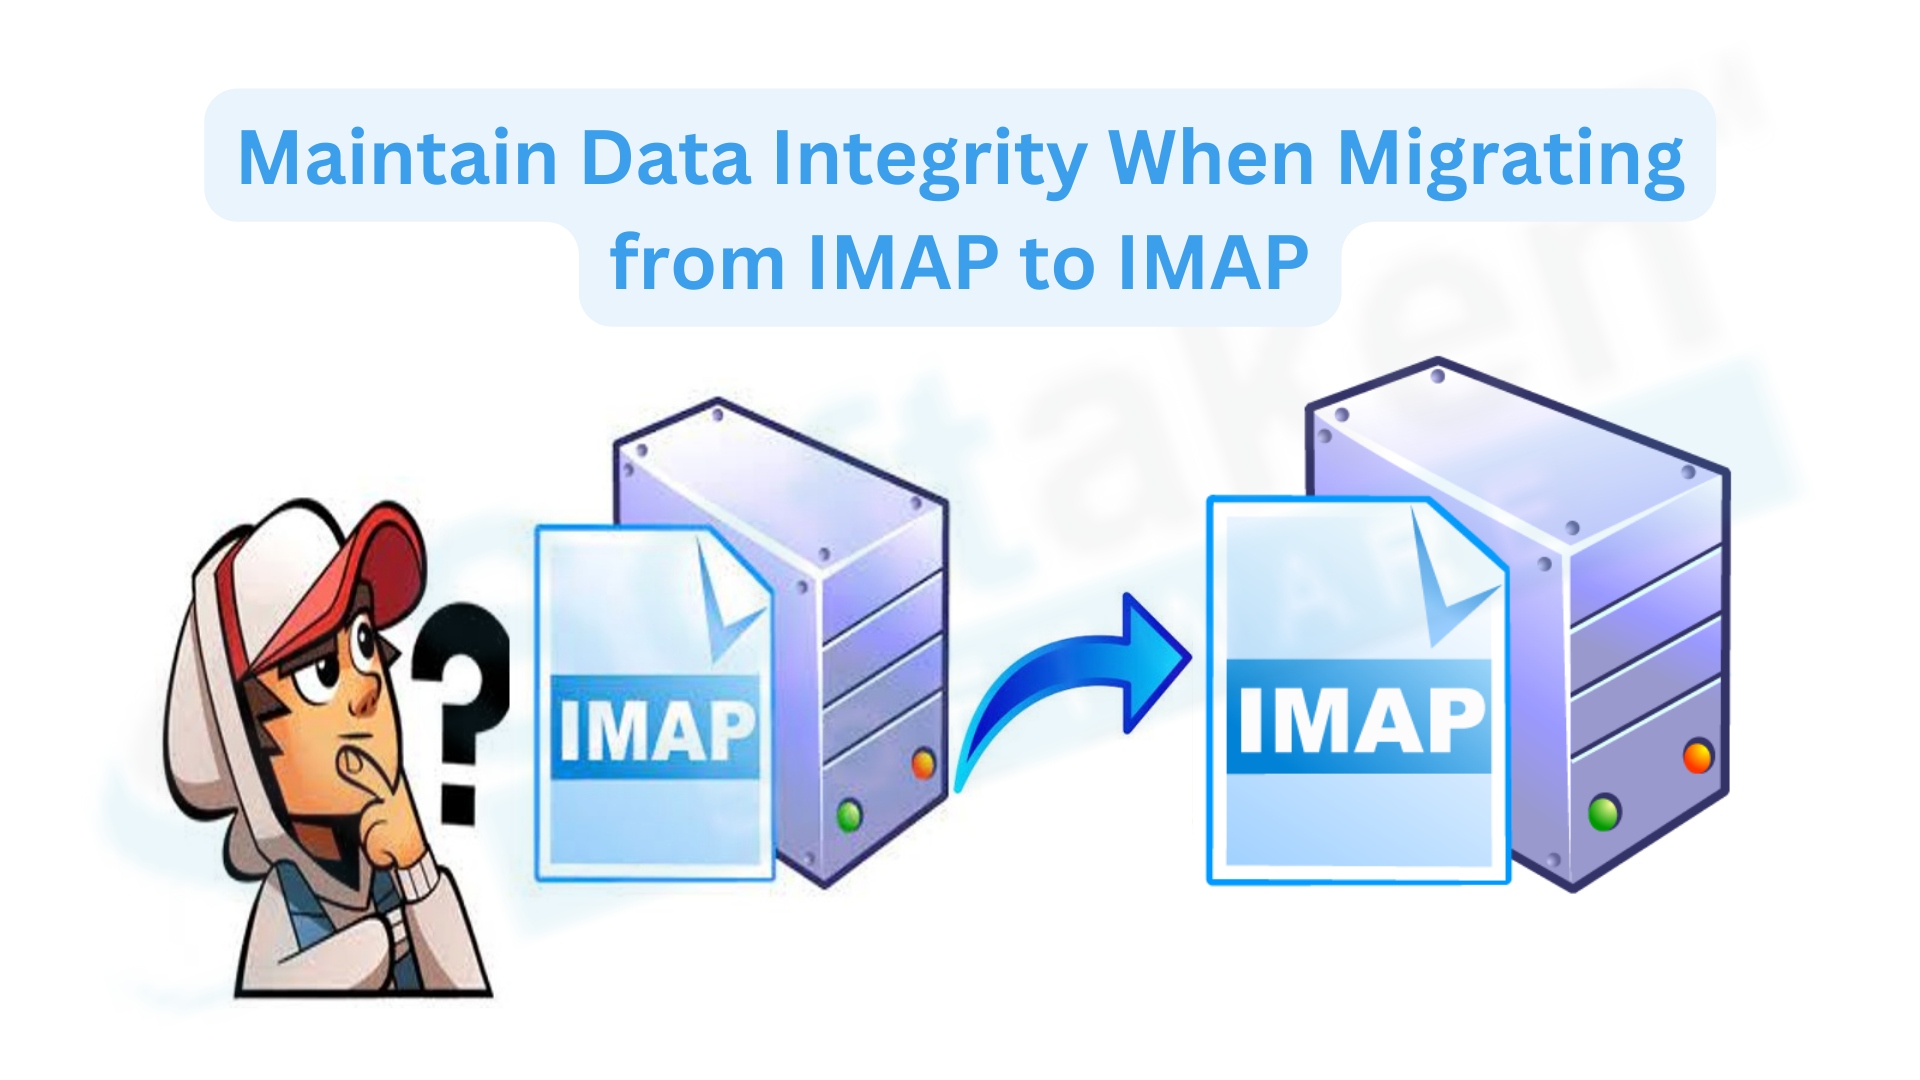 Maintain Data Integrity When Migrating from IMAP to IMAP